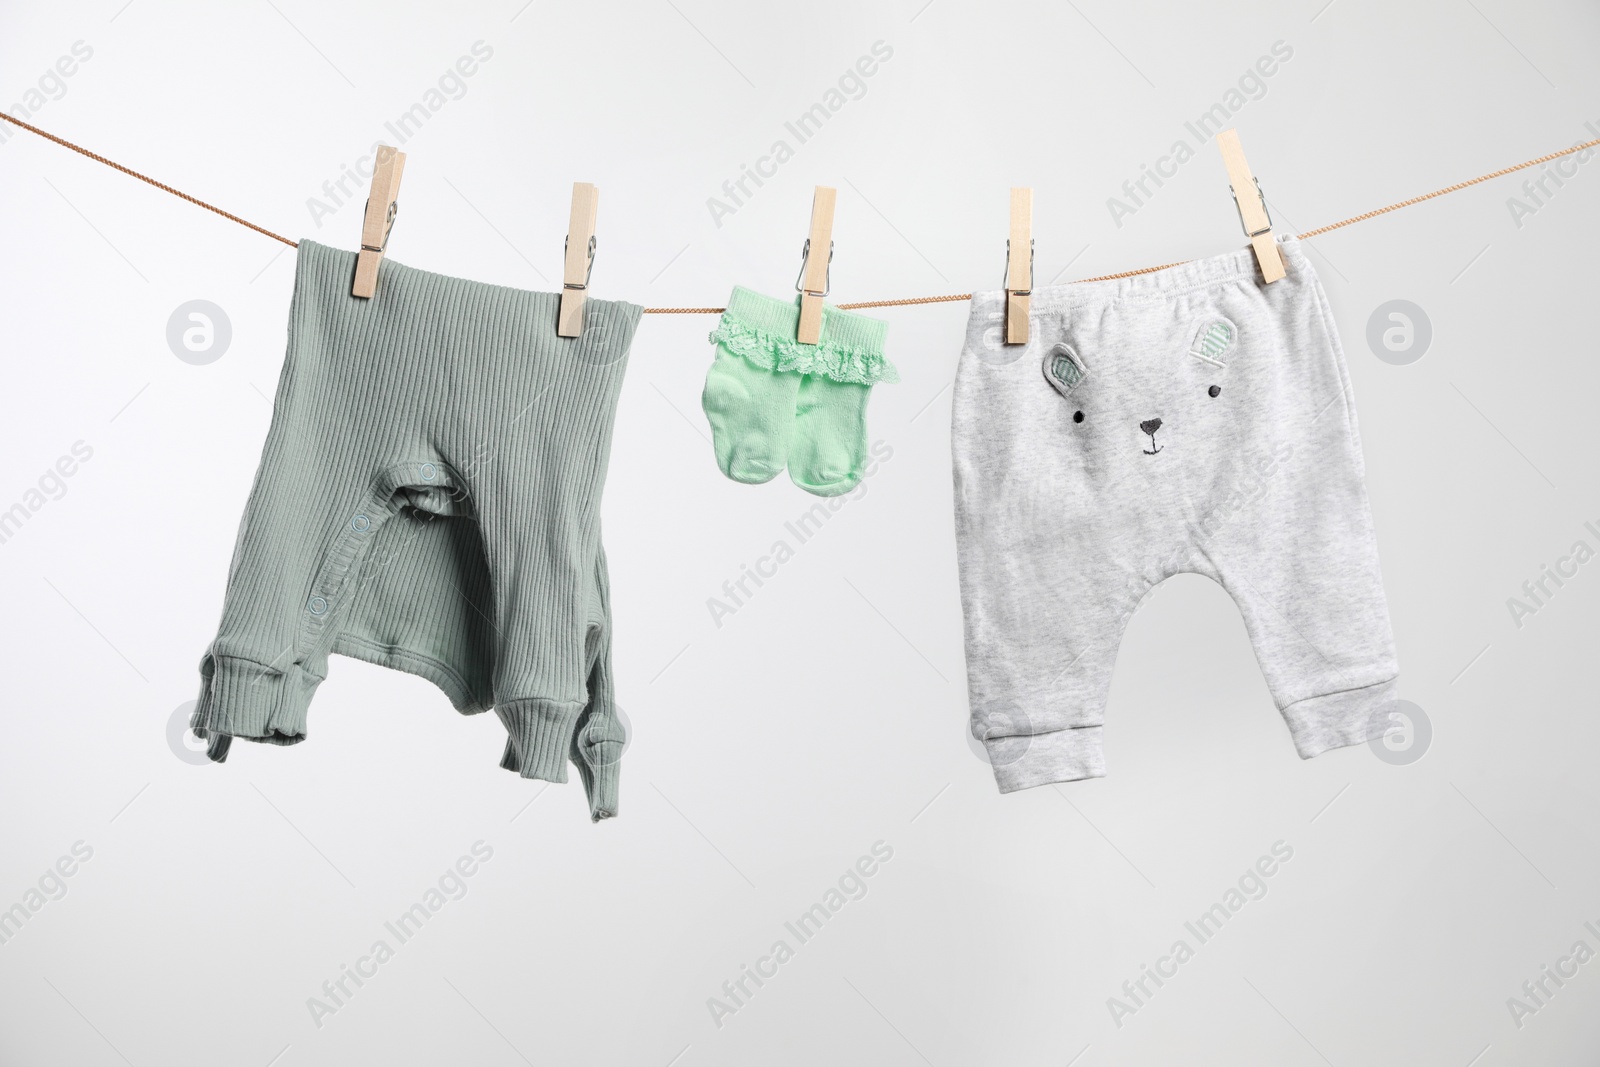 Photo of Cute baby clothes drying on washing line against white background